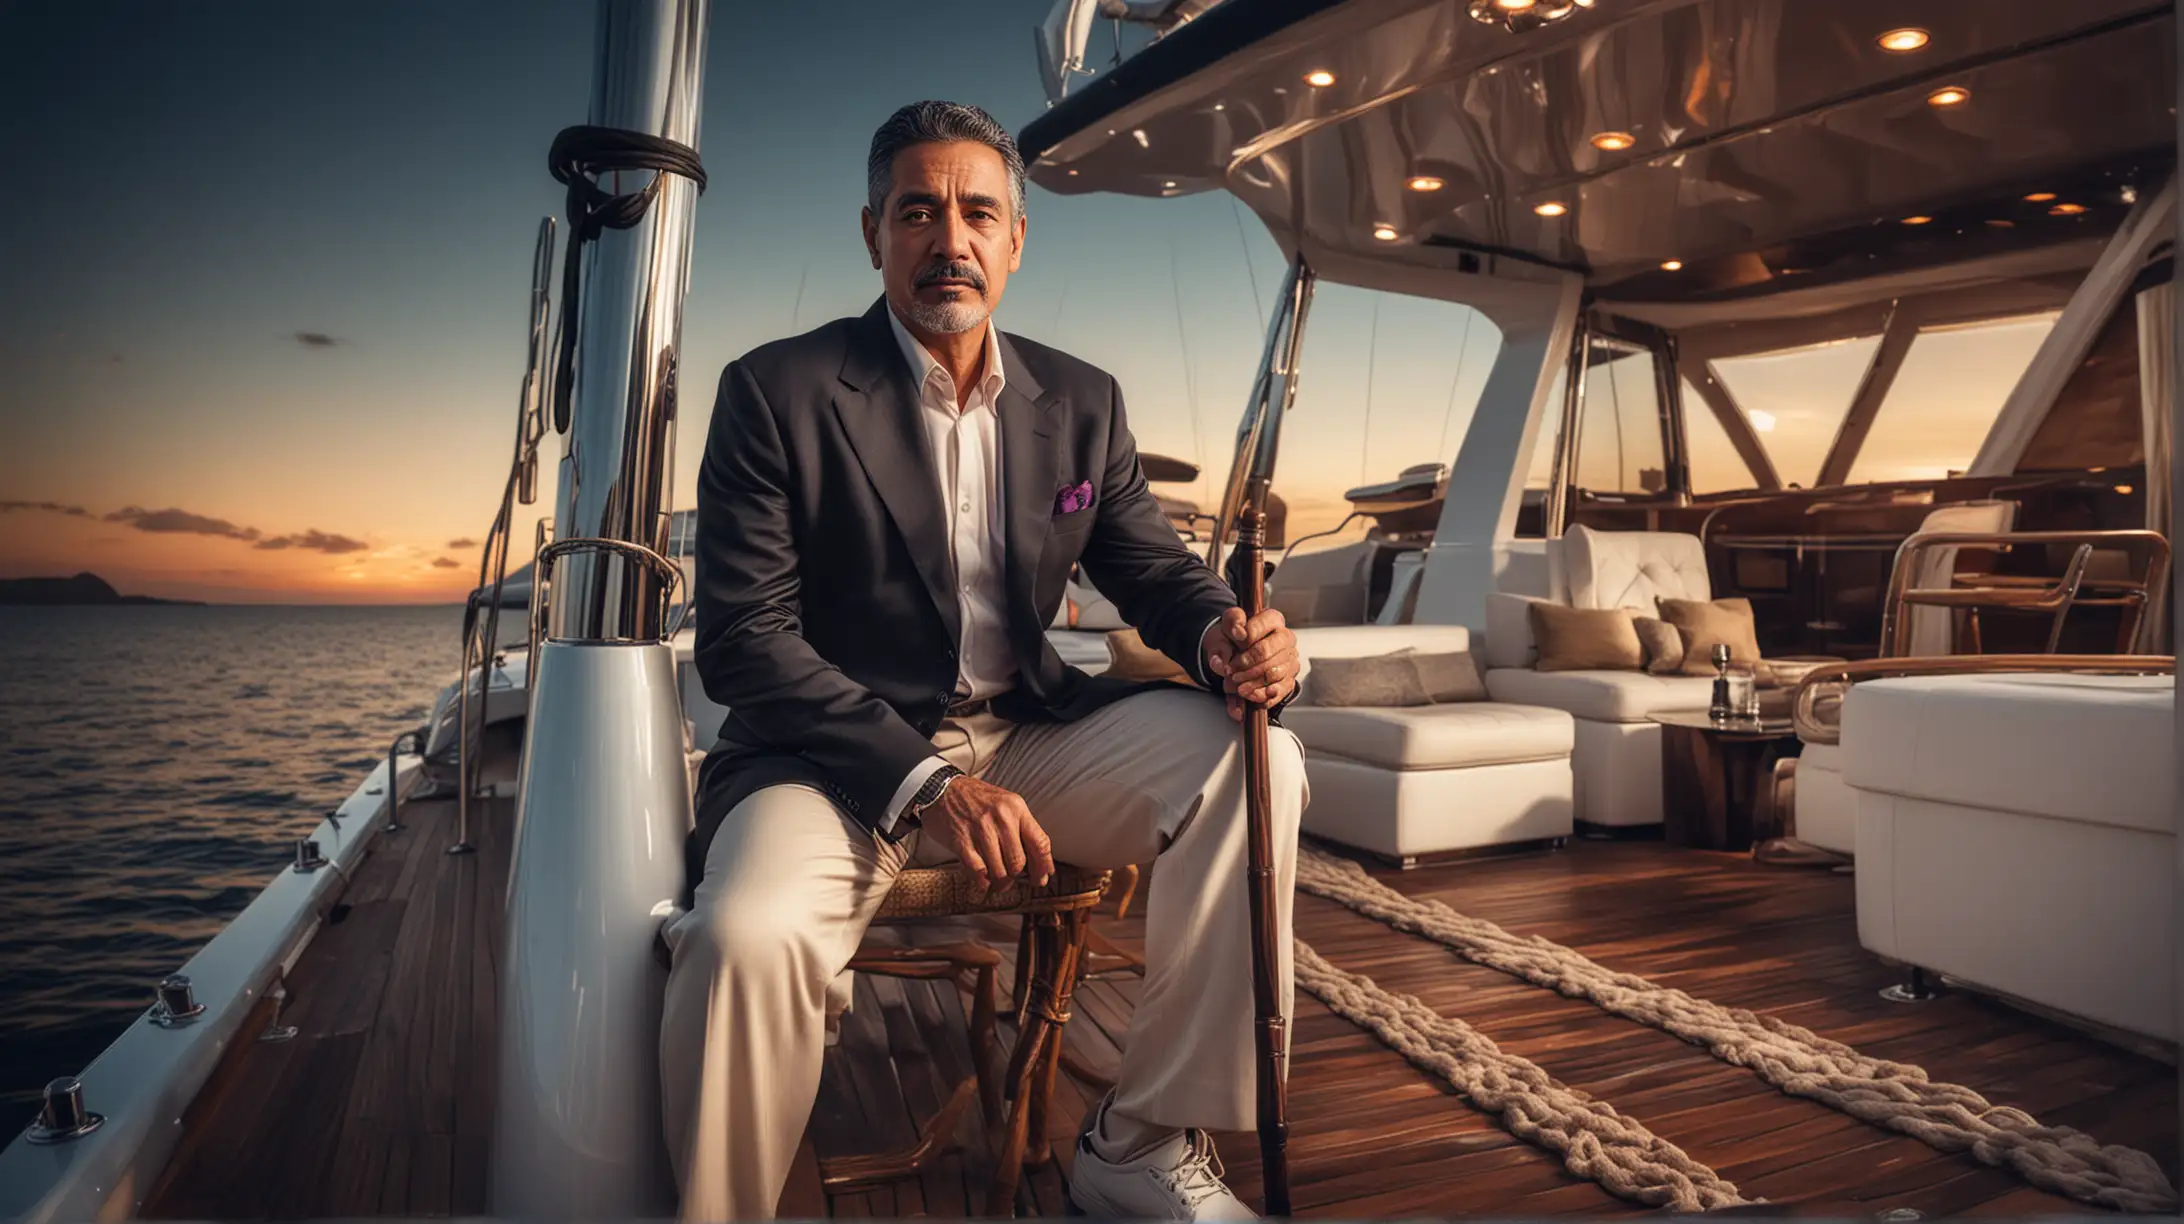 Confident Hispanic Man with Cane Relaxing on Luxurious Yacht